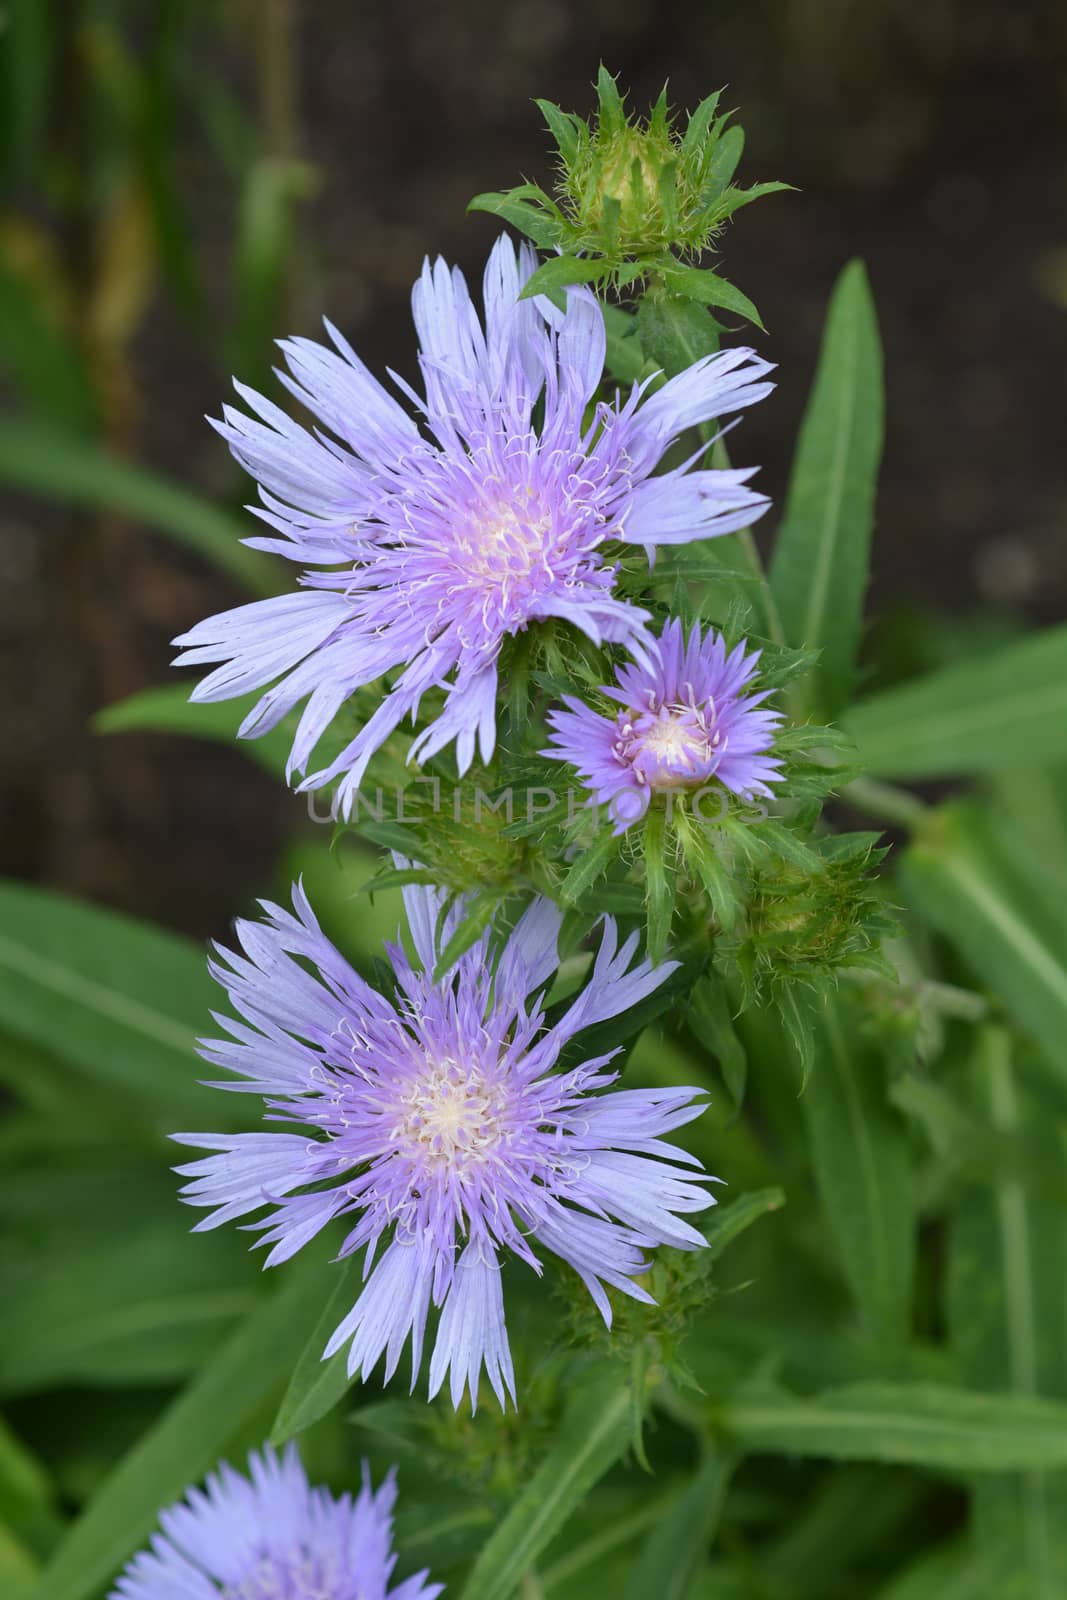 Stokes aster by nahhan